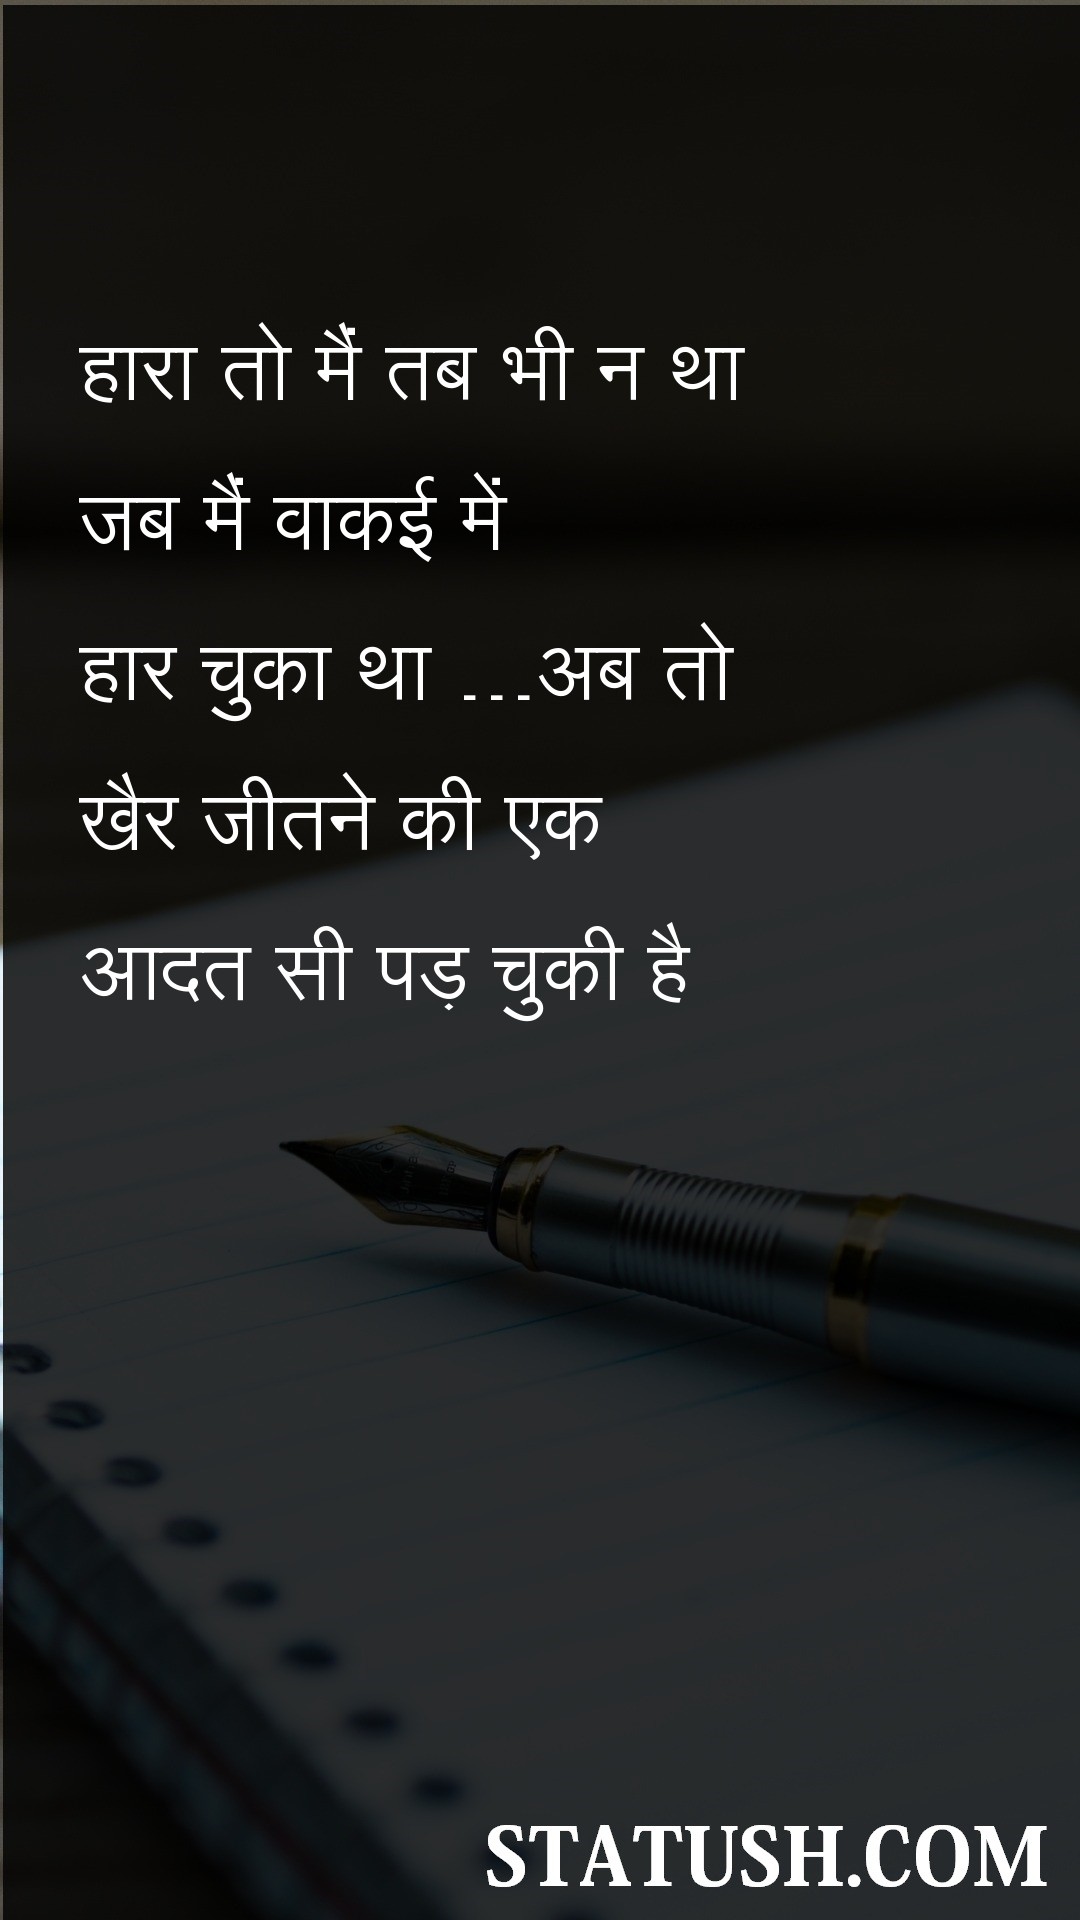 I was not lost even then - Hindi Quotes at statush.com